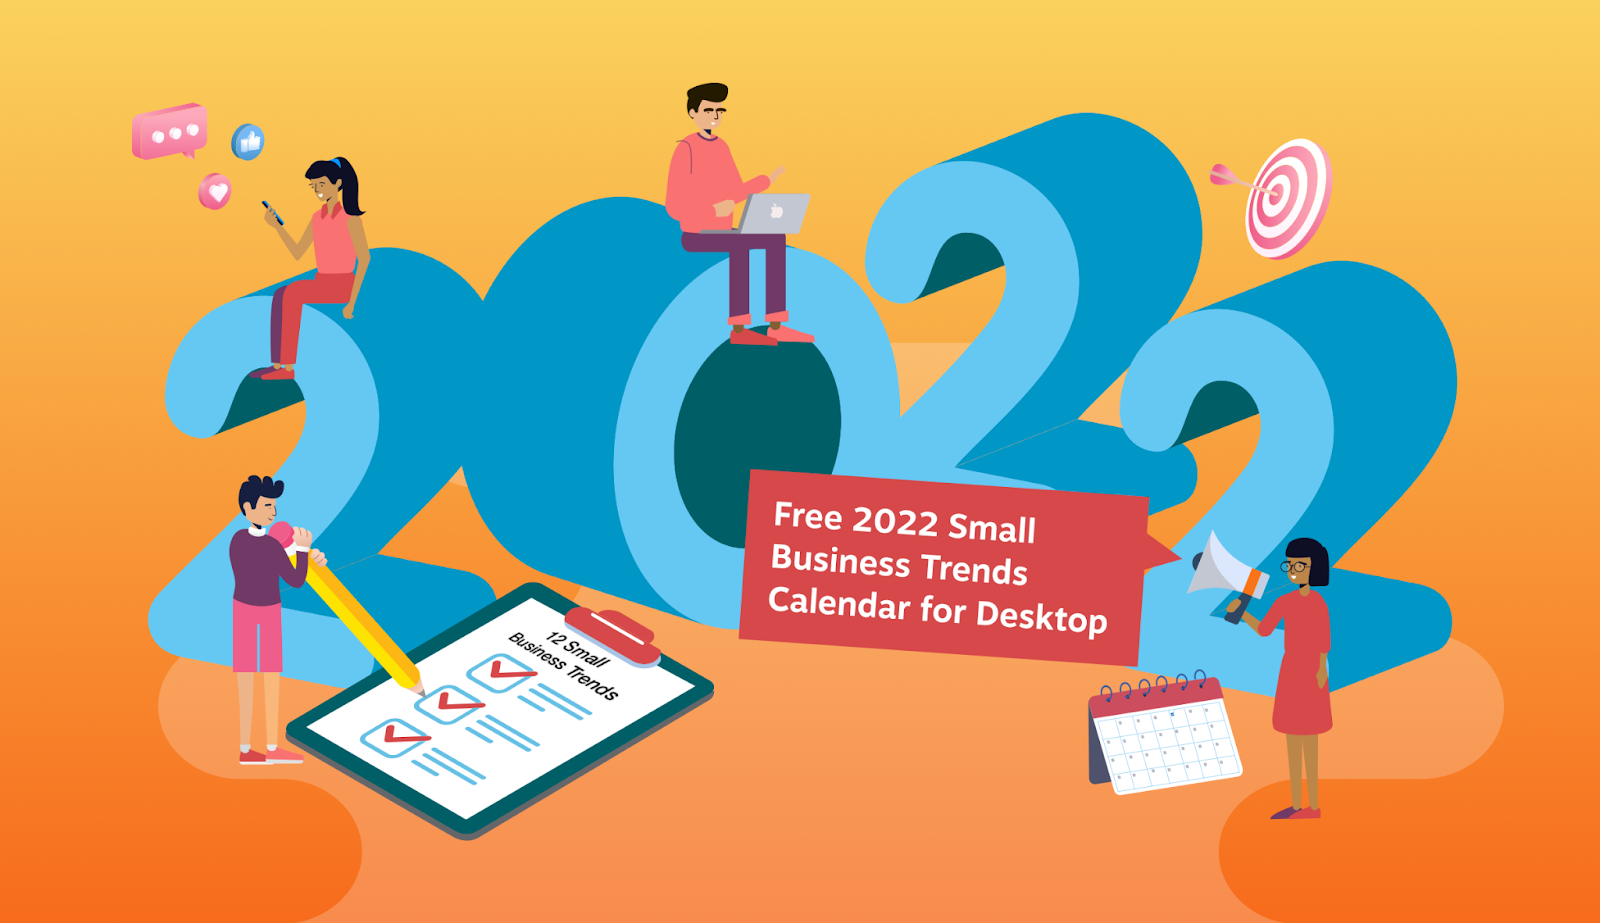 Illustration of a blue "2022" sign at the centre with a group of people surrounding on an orange background. Two people are sitting on the sign and using their Apple devices; one person is doing check marks on a clip board with "12 Small Business Trends" written on it; and one person is shouting on a megaphone with a sign saying "Free 2022 Small Business Trends Calendar for Desktop".  